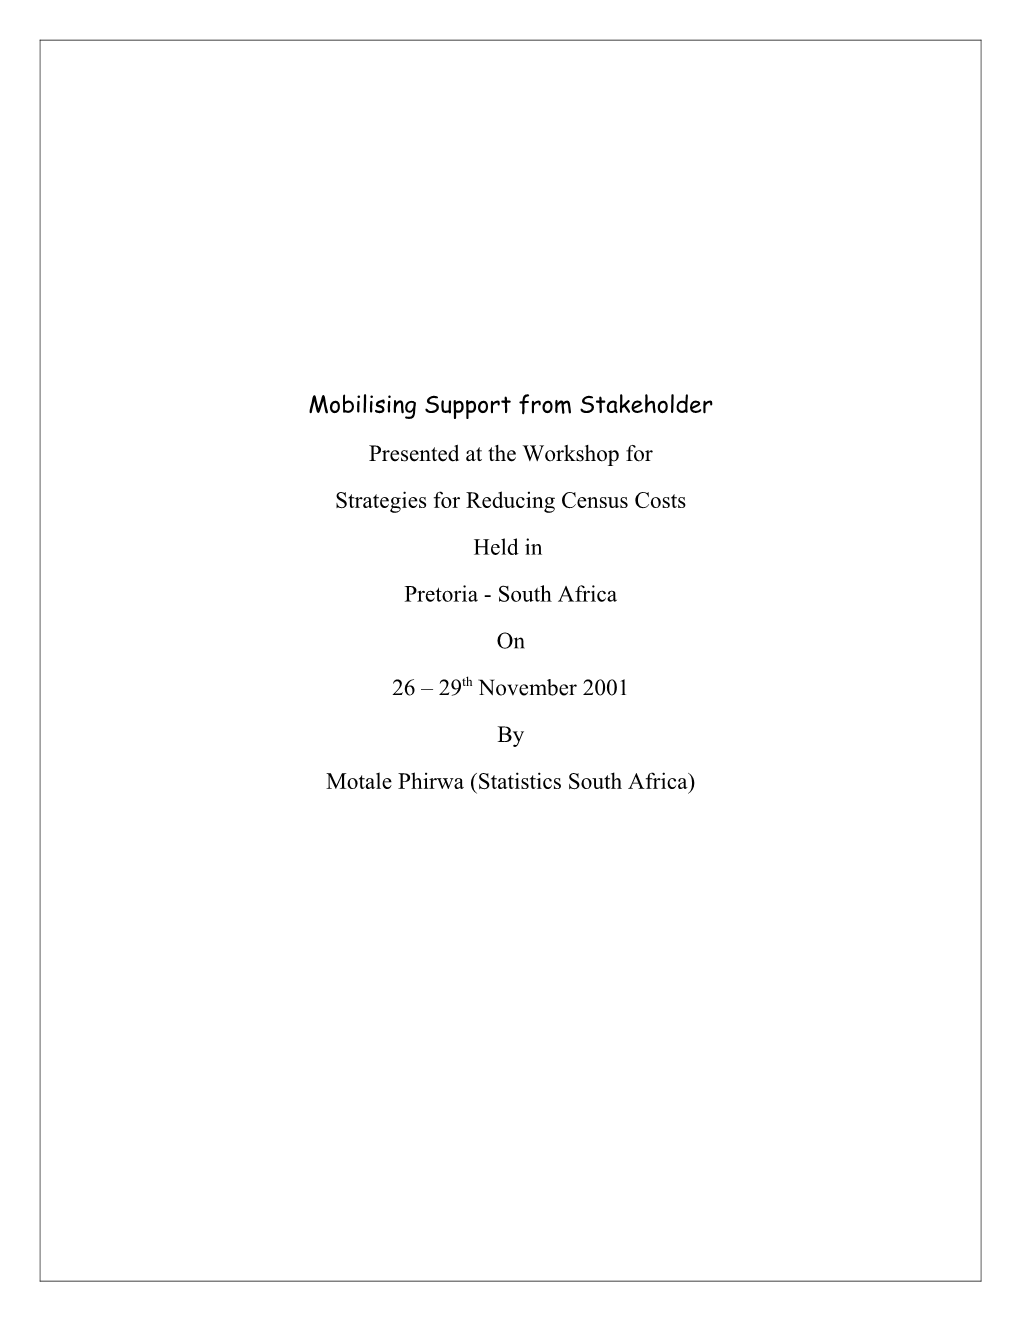 Mobilising Support from Stakeholder